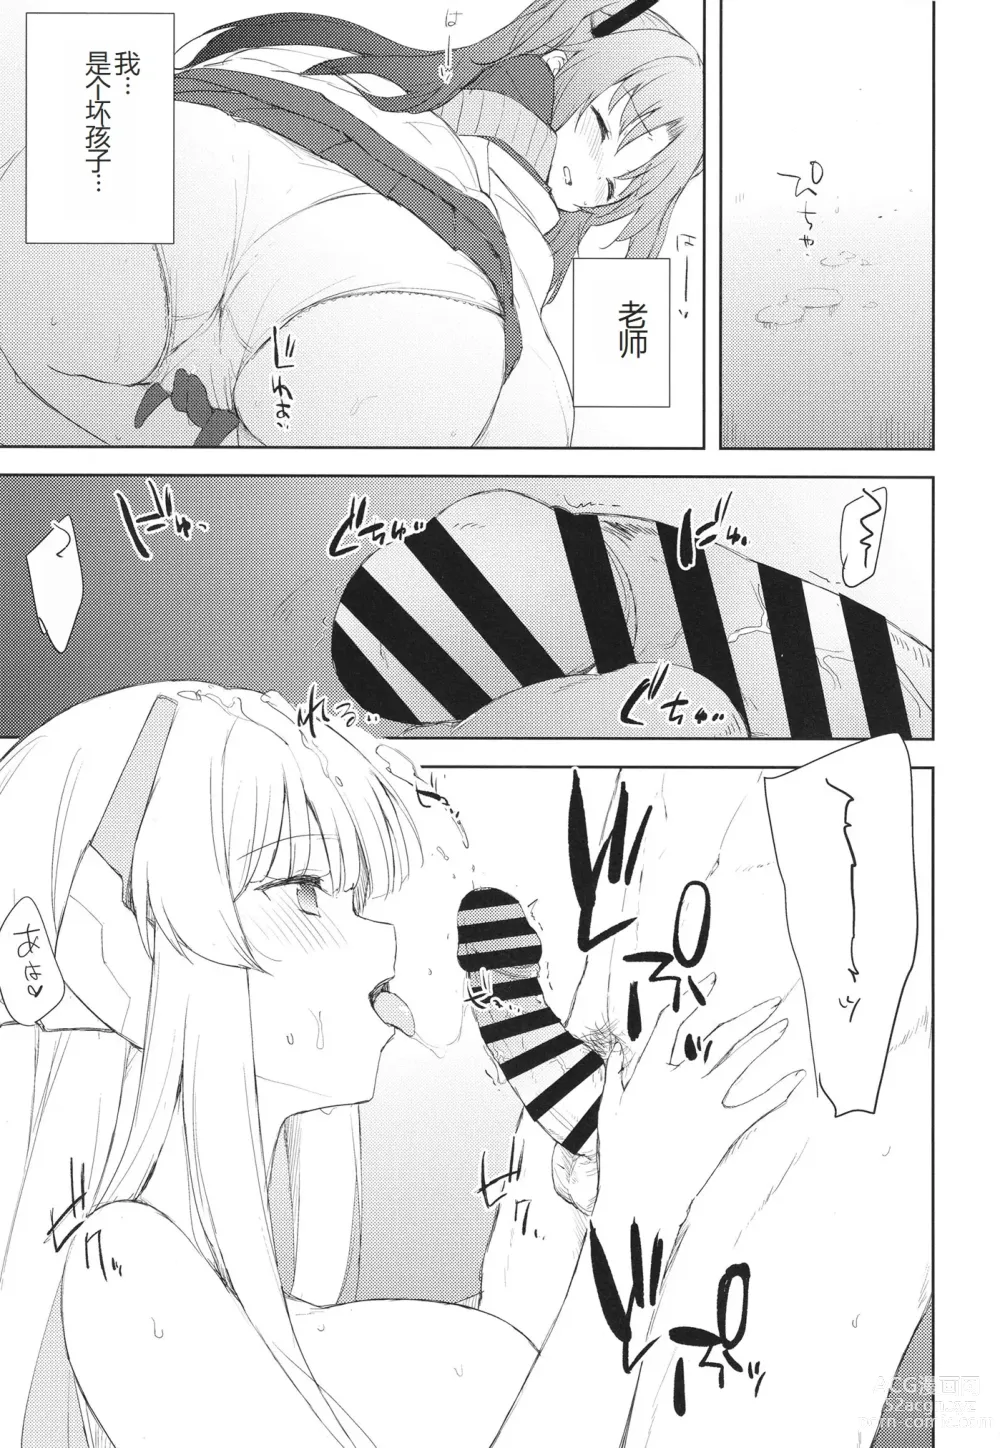 Page 11 of doujinshi Blue_Transparency